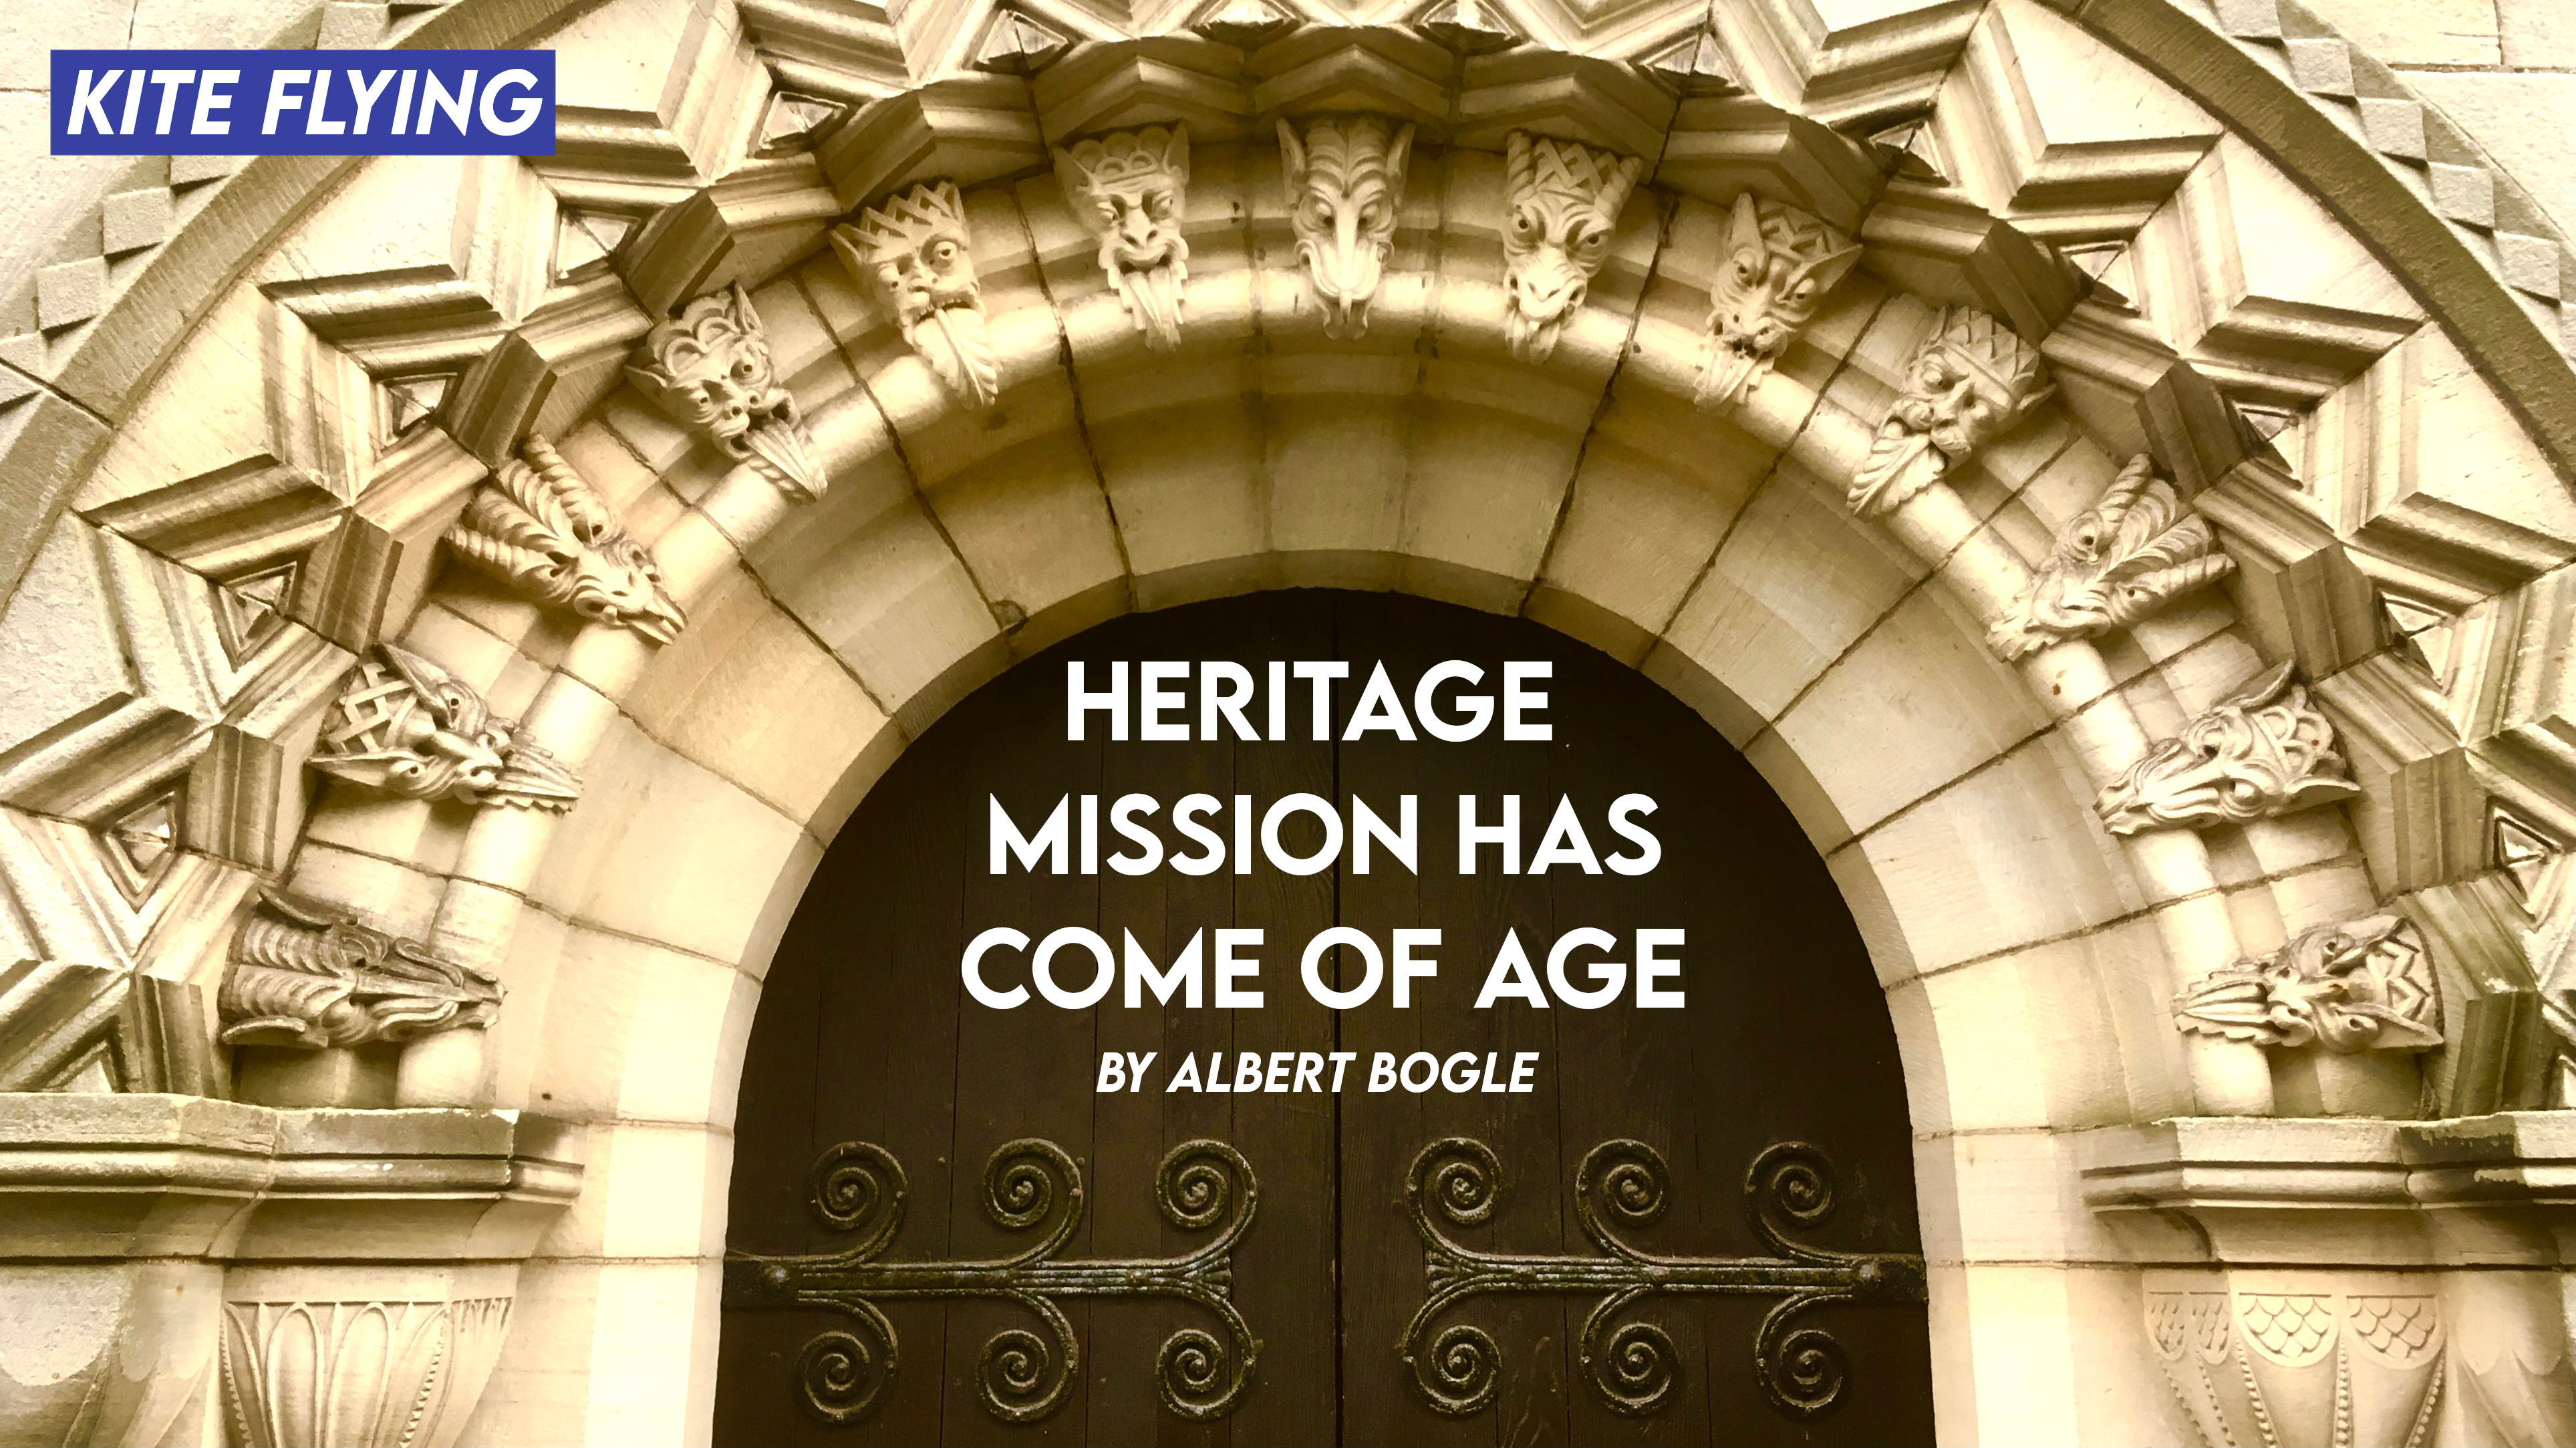 Heritage Mission has Come of Age